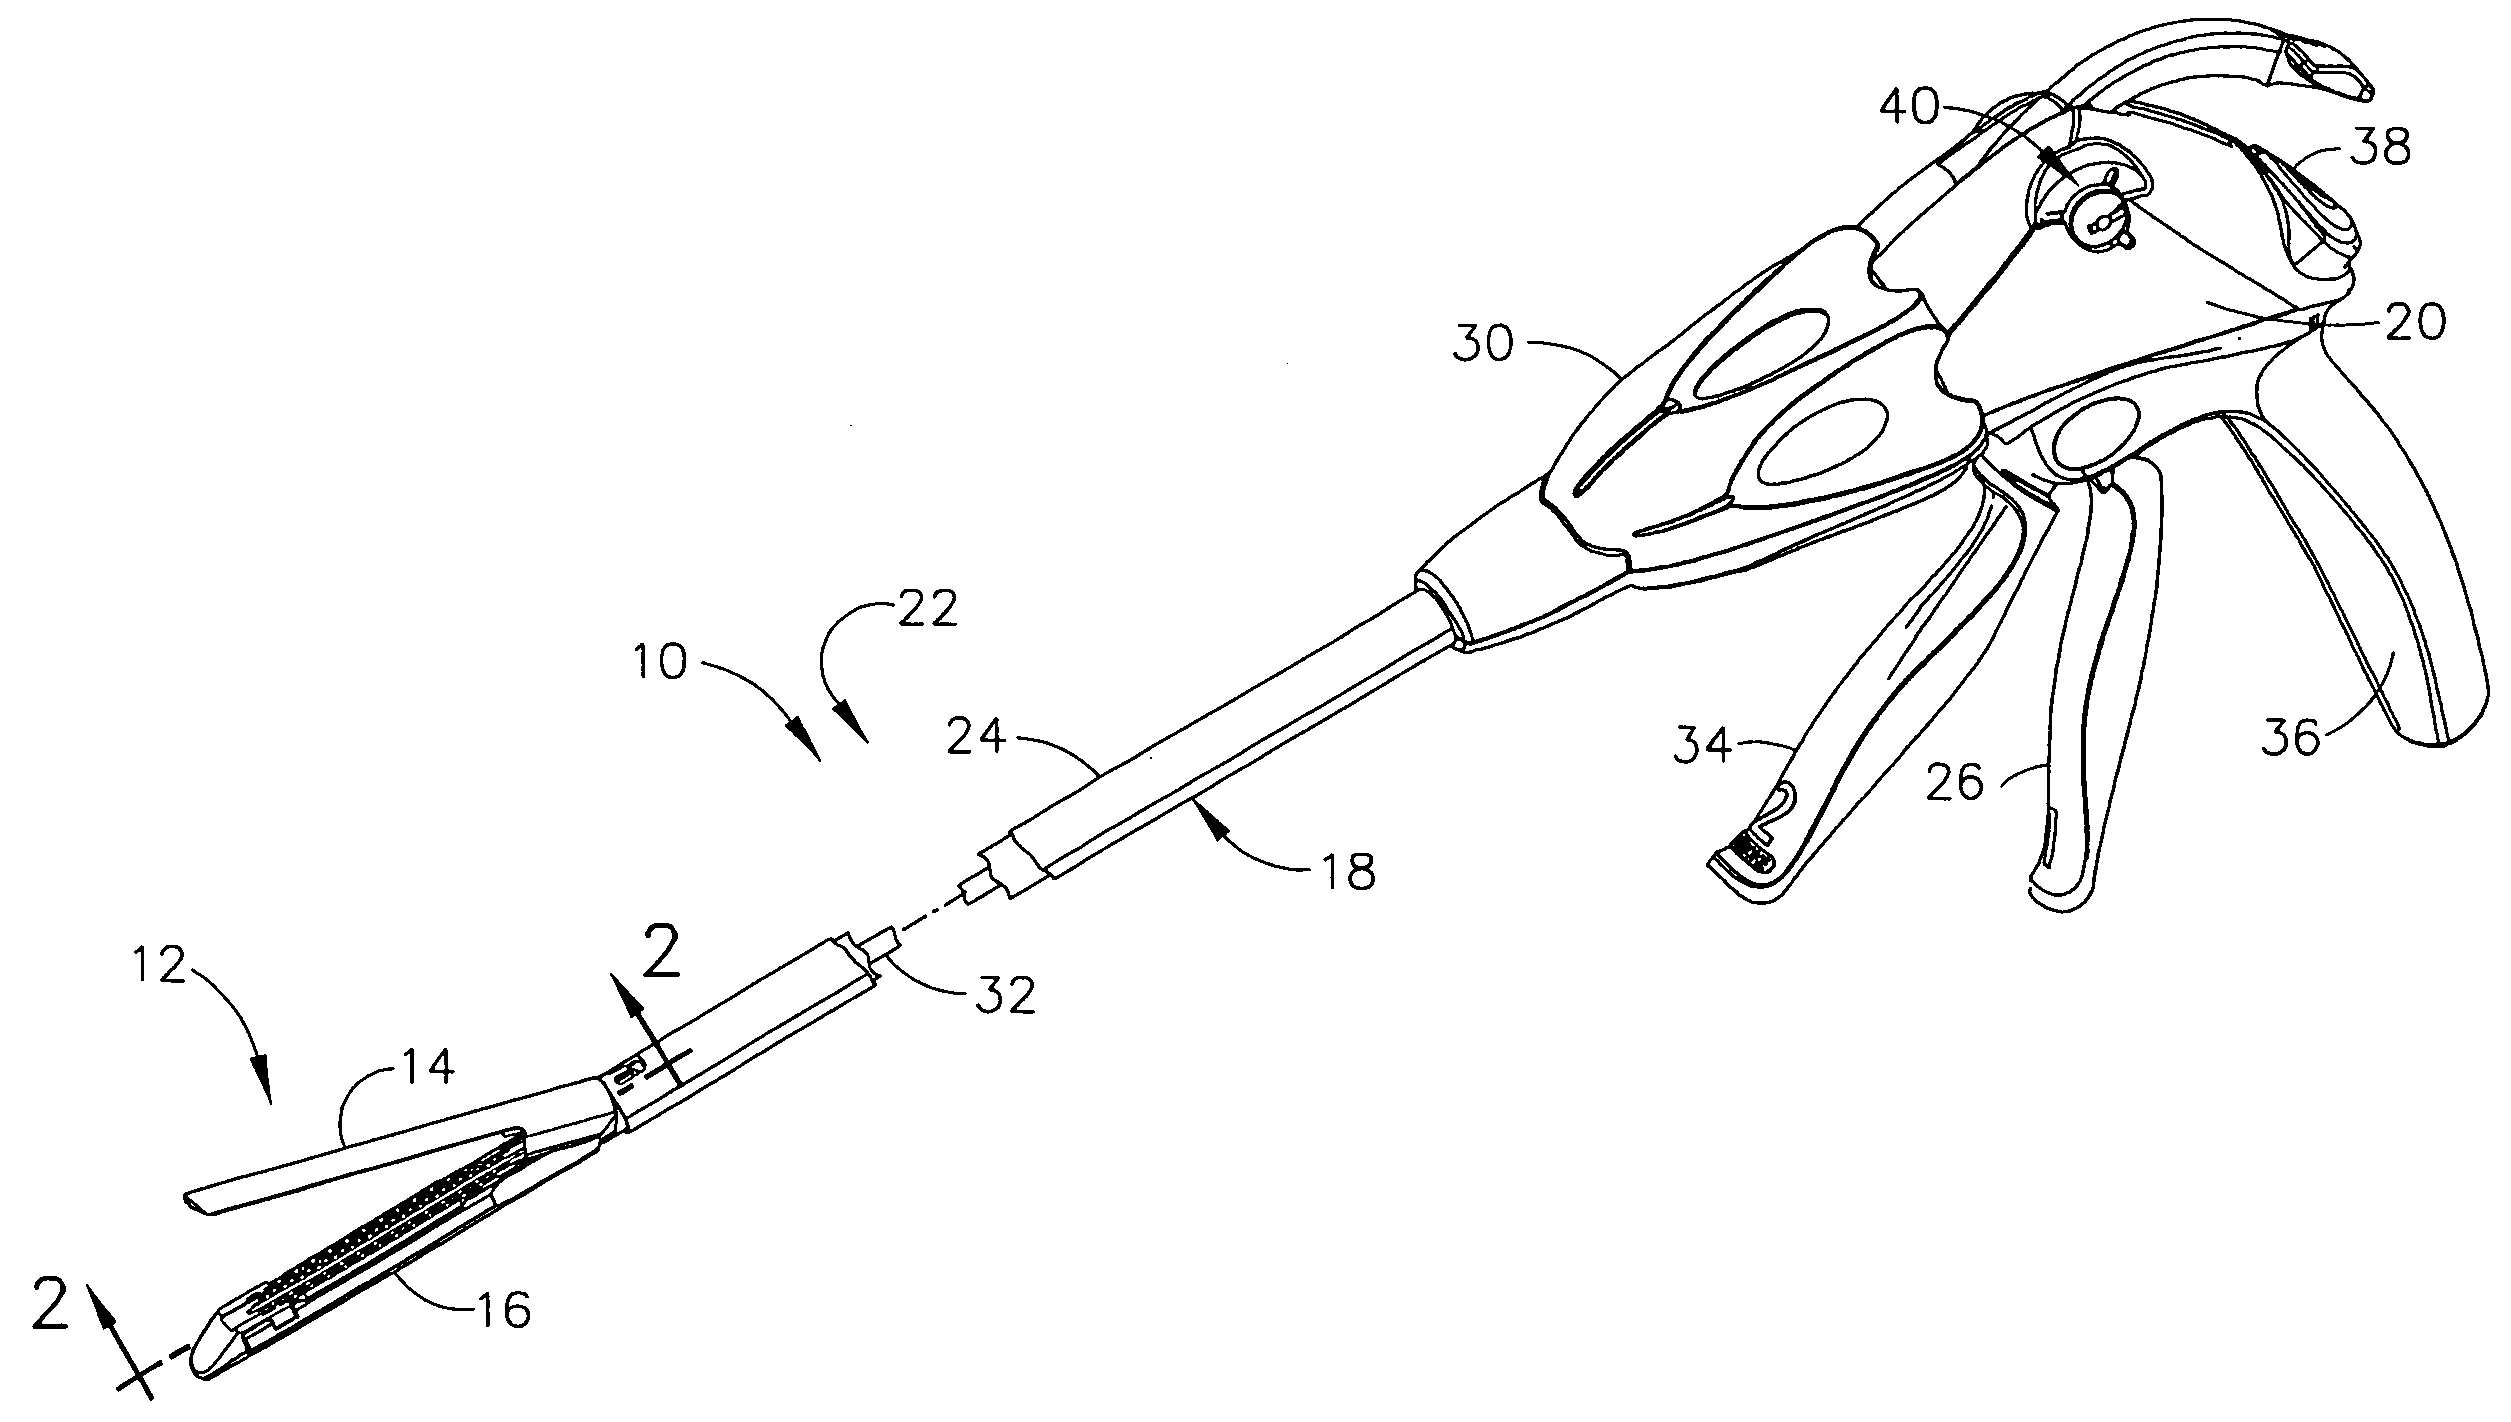 Surgical stapling and cutting instrument with side mounted retraction member